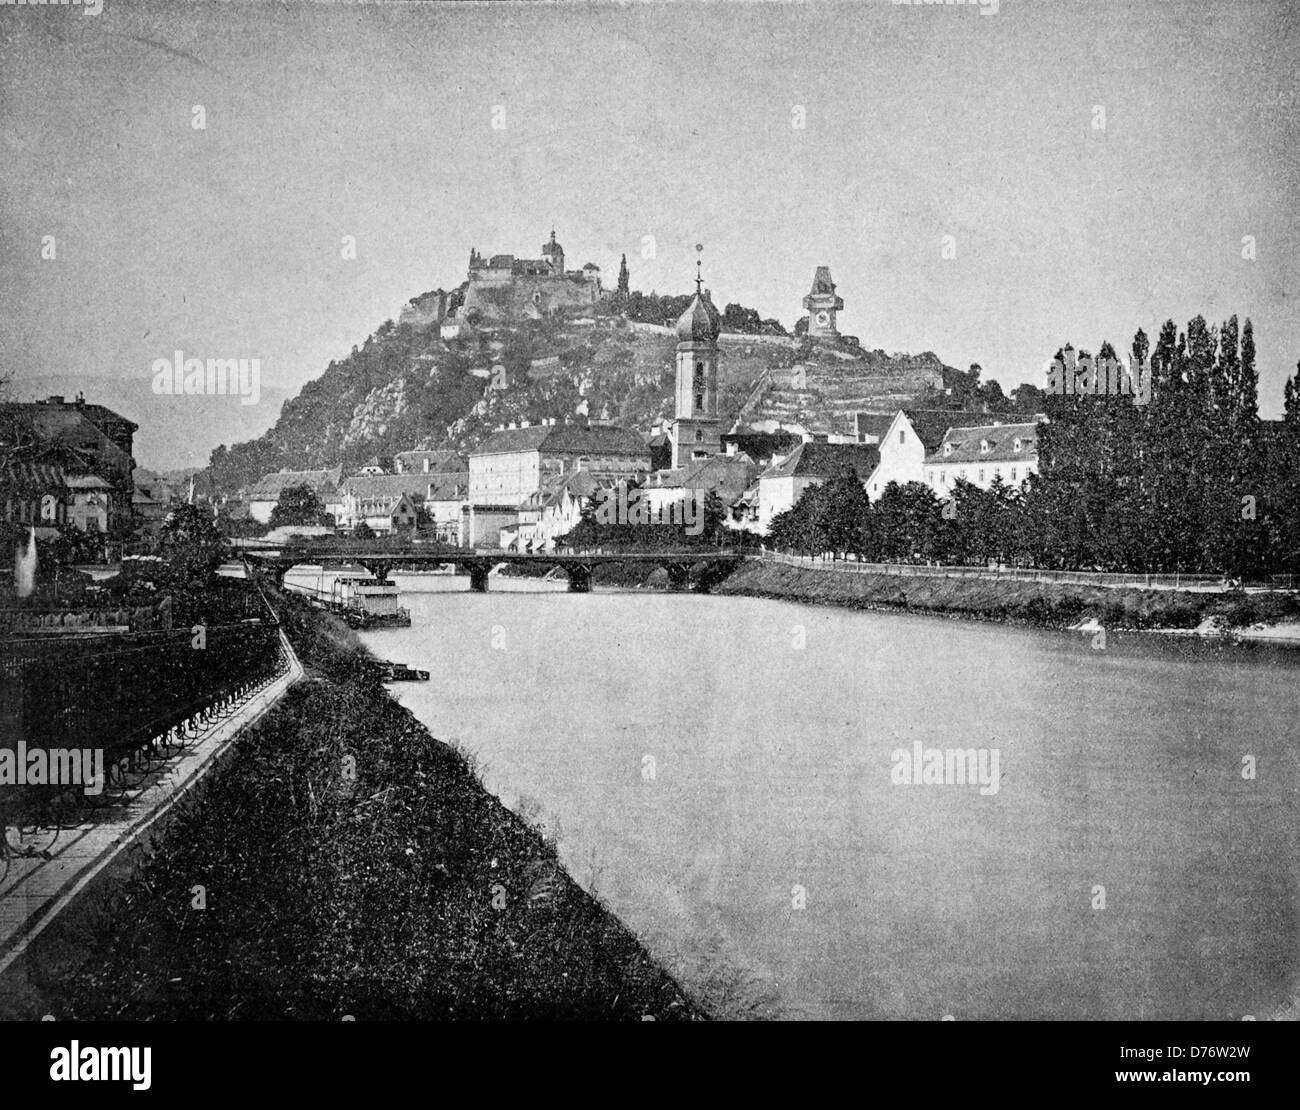 Early autotype of the Grazer Schlossberg castle hill with fortress in Graz, Styria, Austria, 1880 Stock Photo